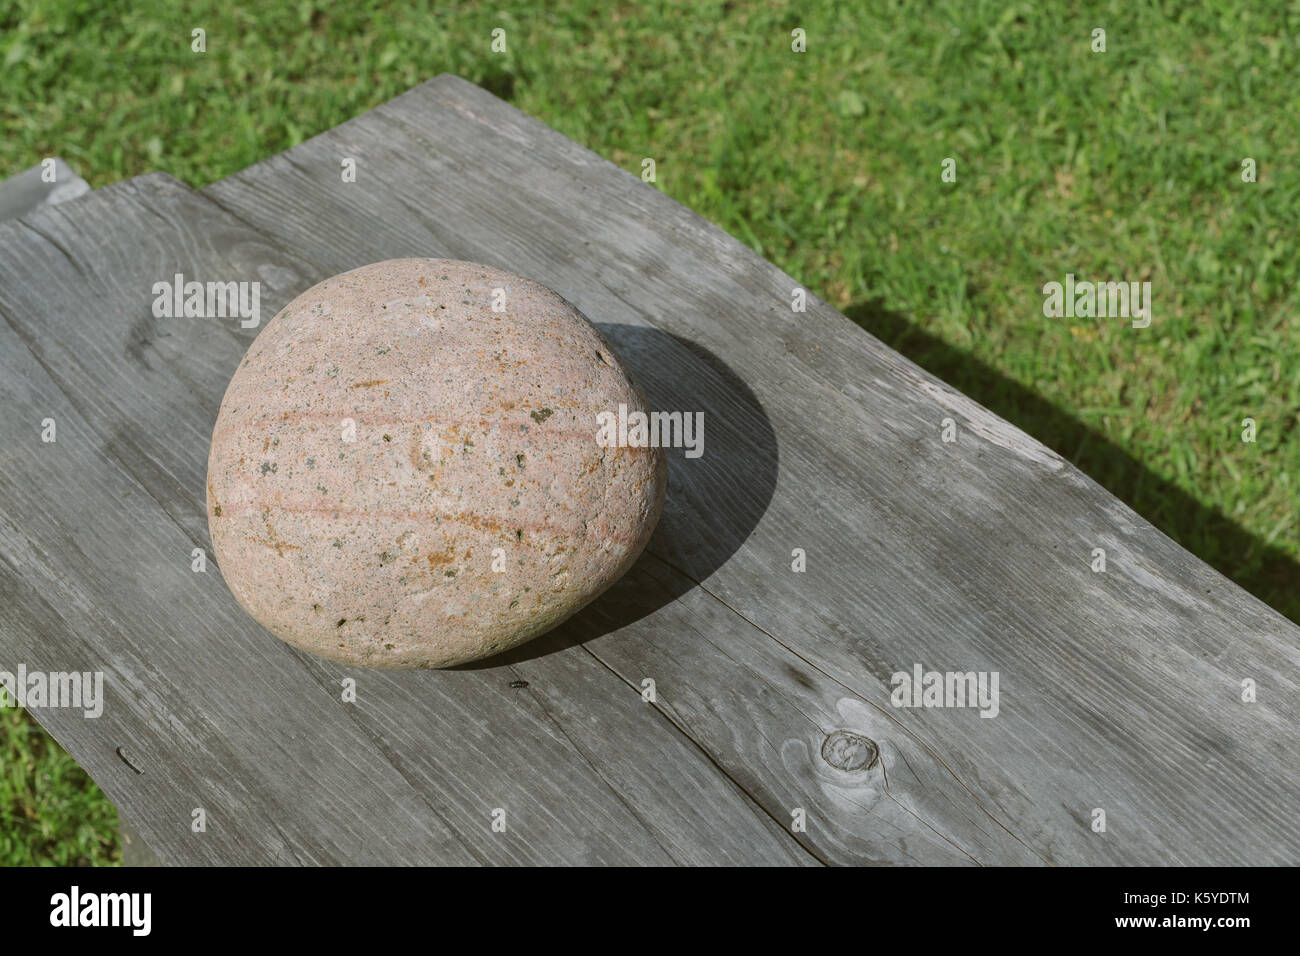 Stone on a wooden board. Stock Photo